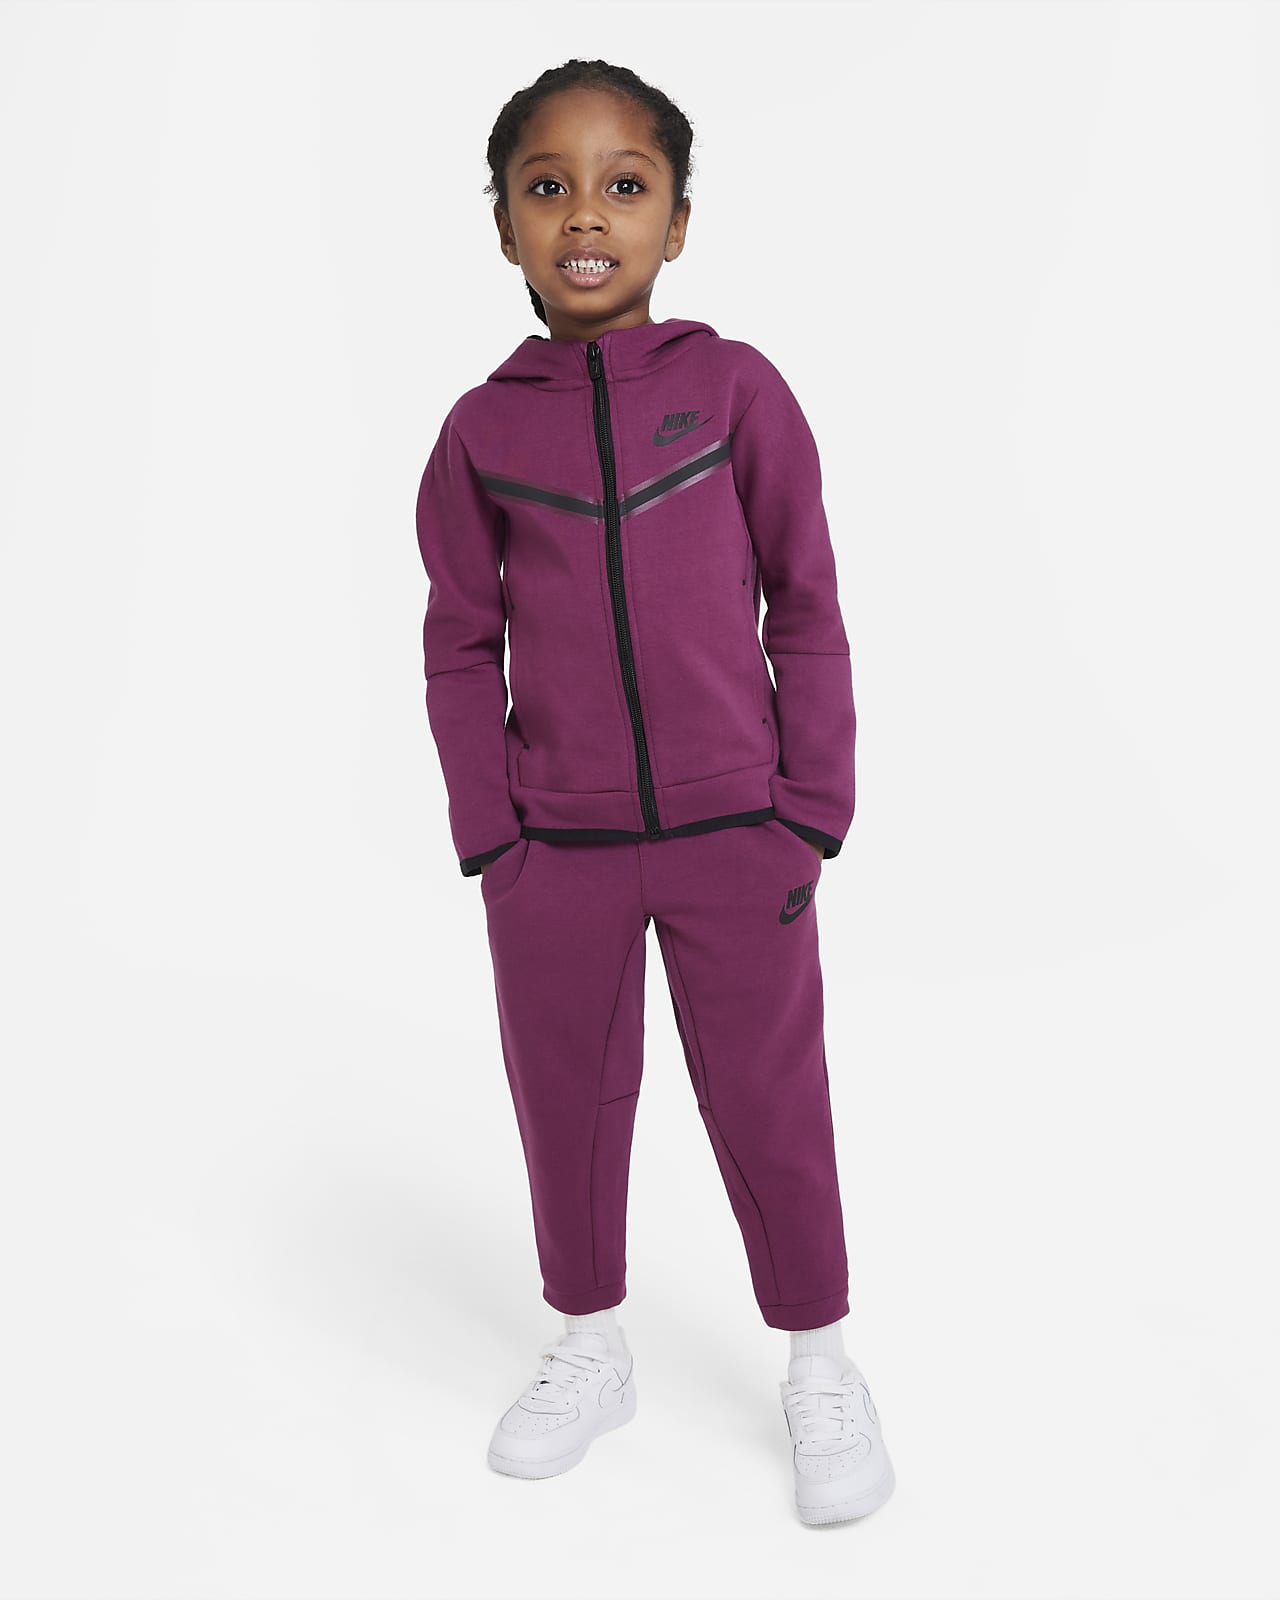 Under Armour Little Boys Zip Front Hoodie Sets, Little Boys' Clothing Sets